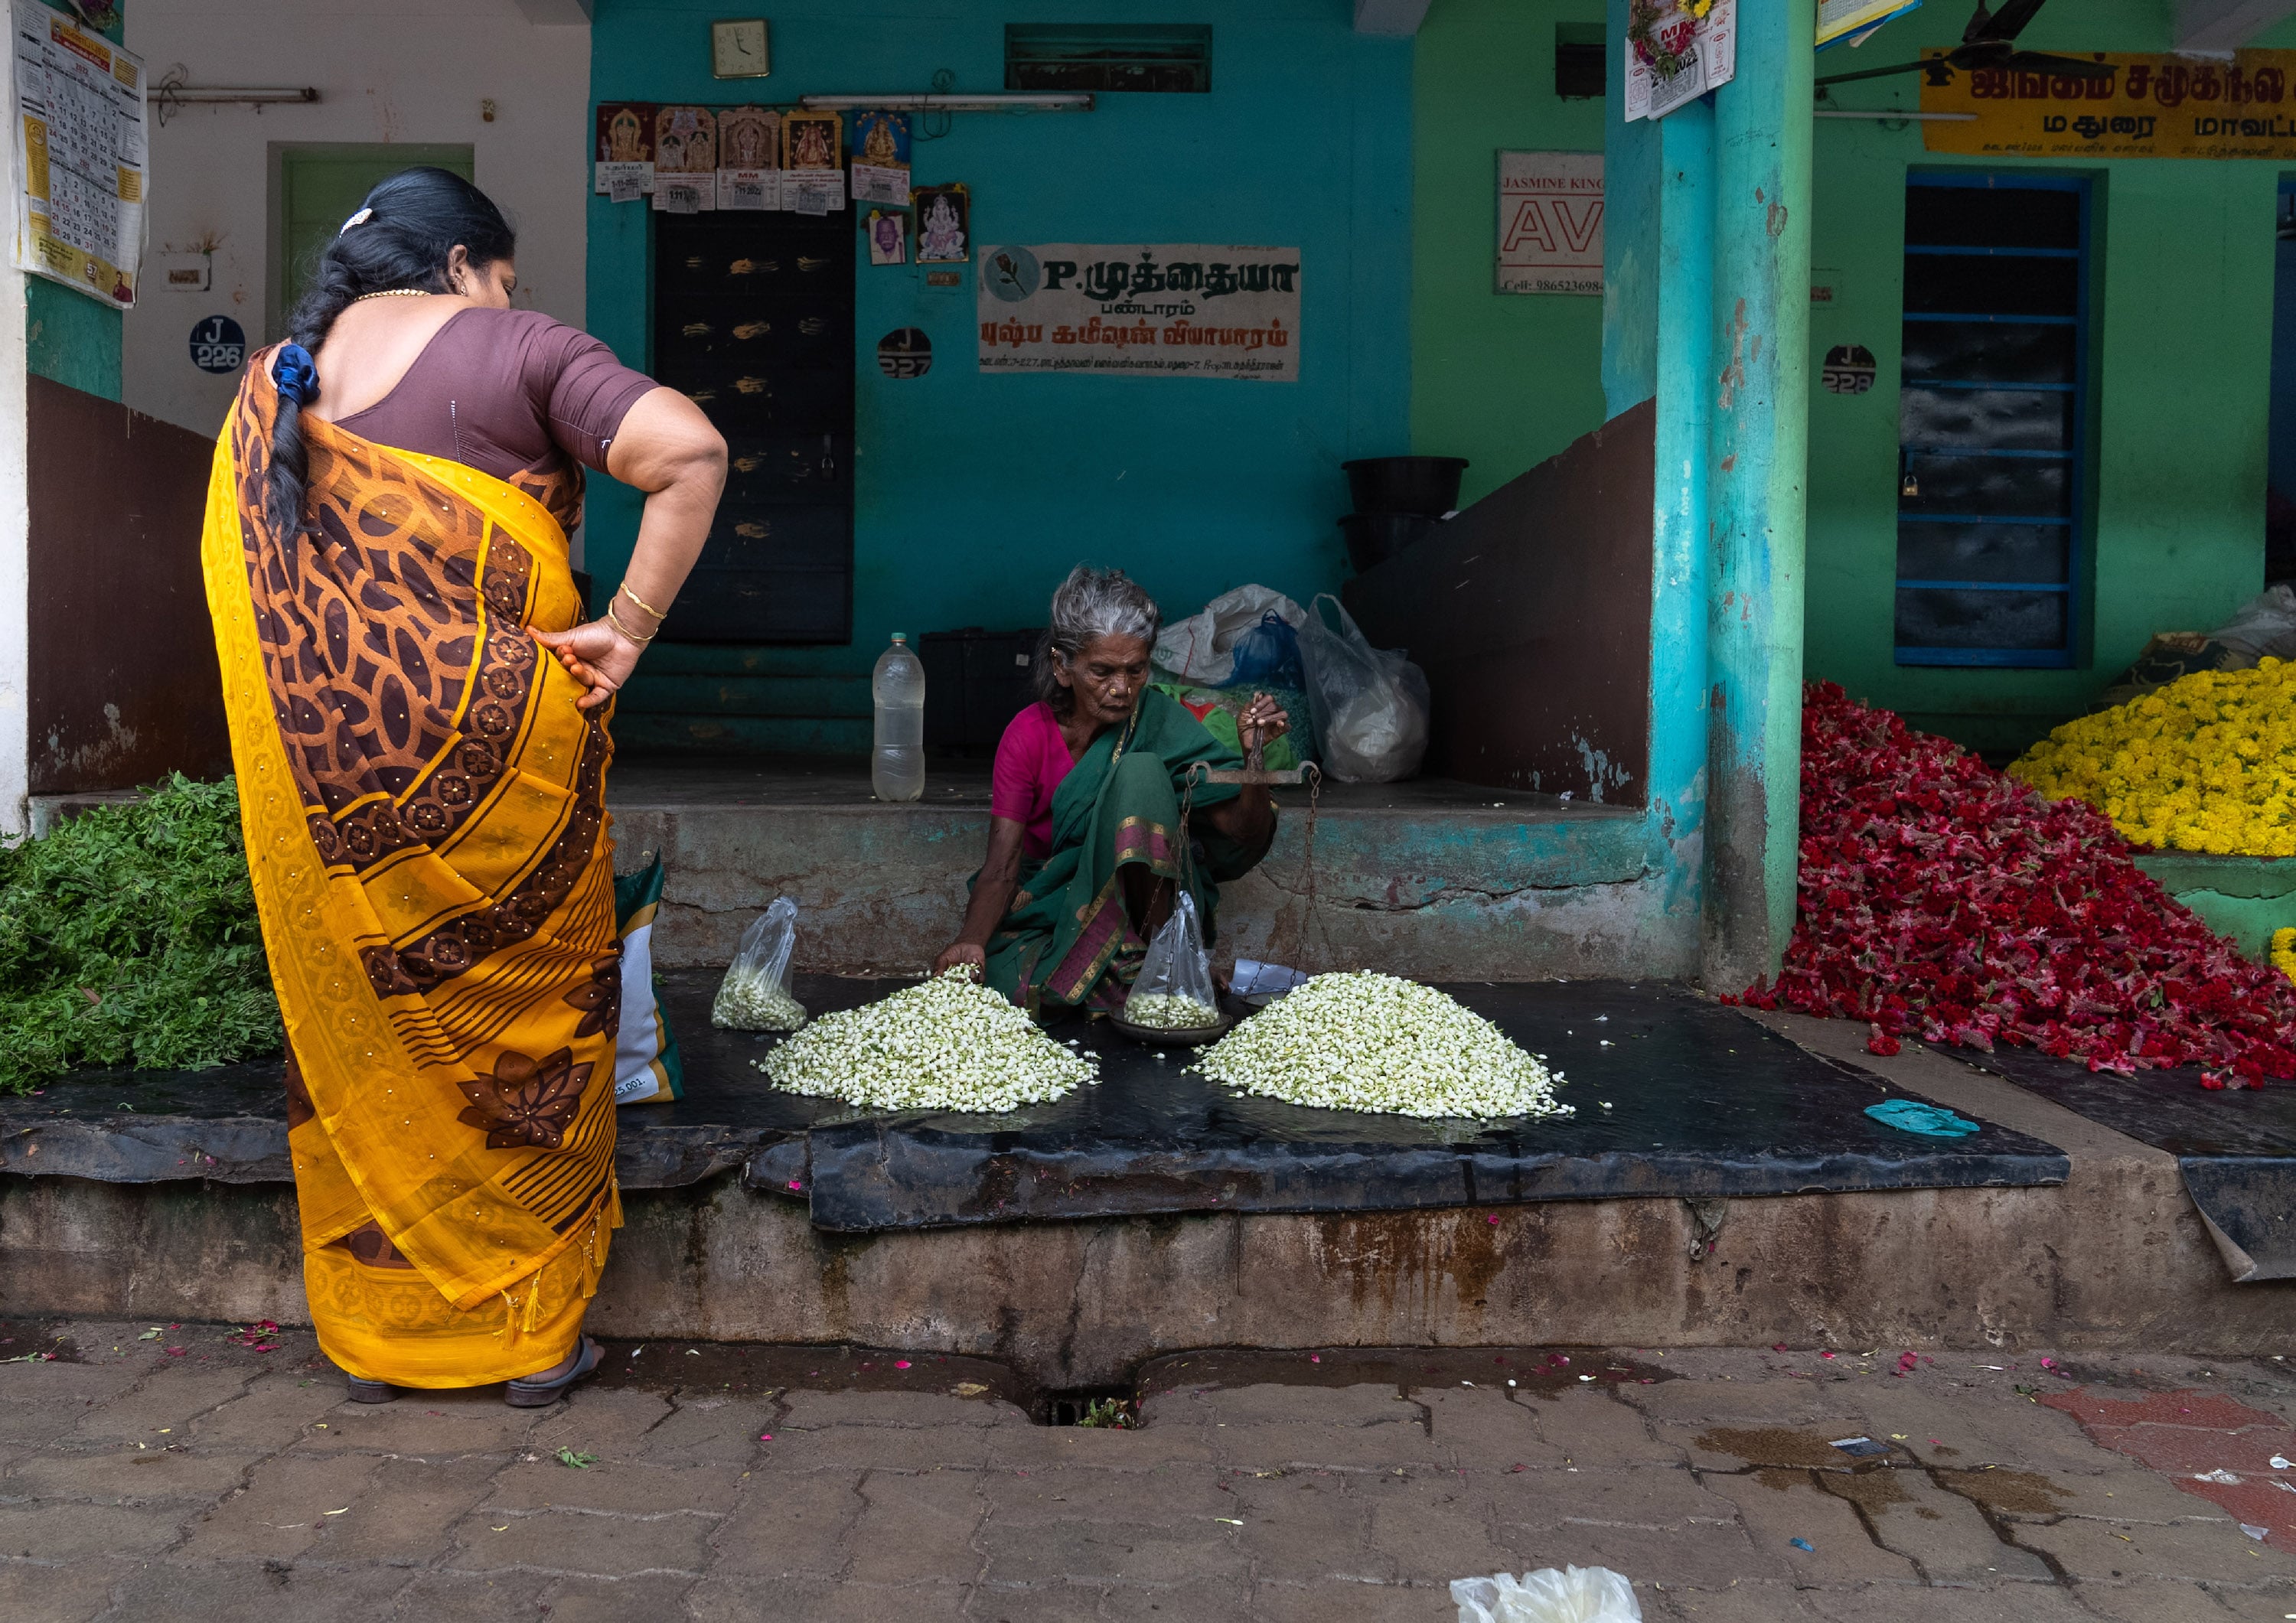 A woman buying flowers at a street market in Tamil Nadu